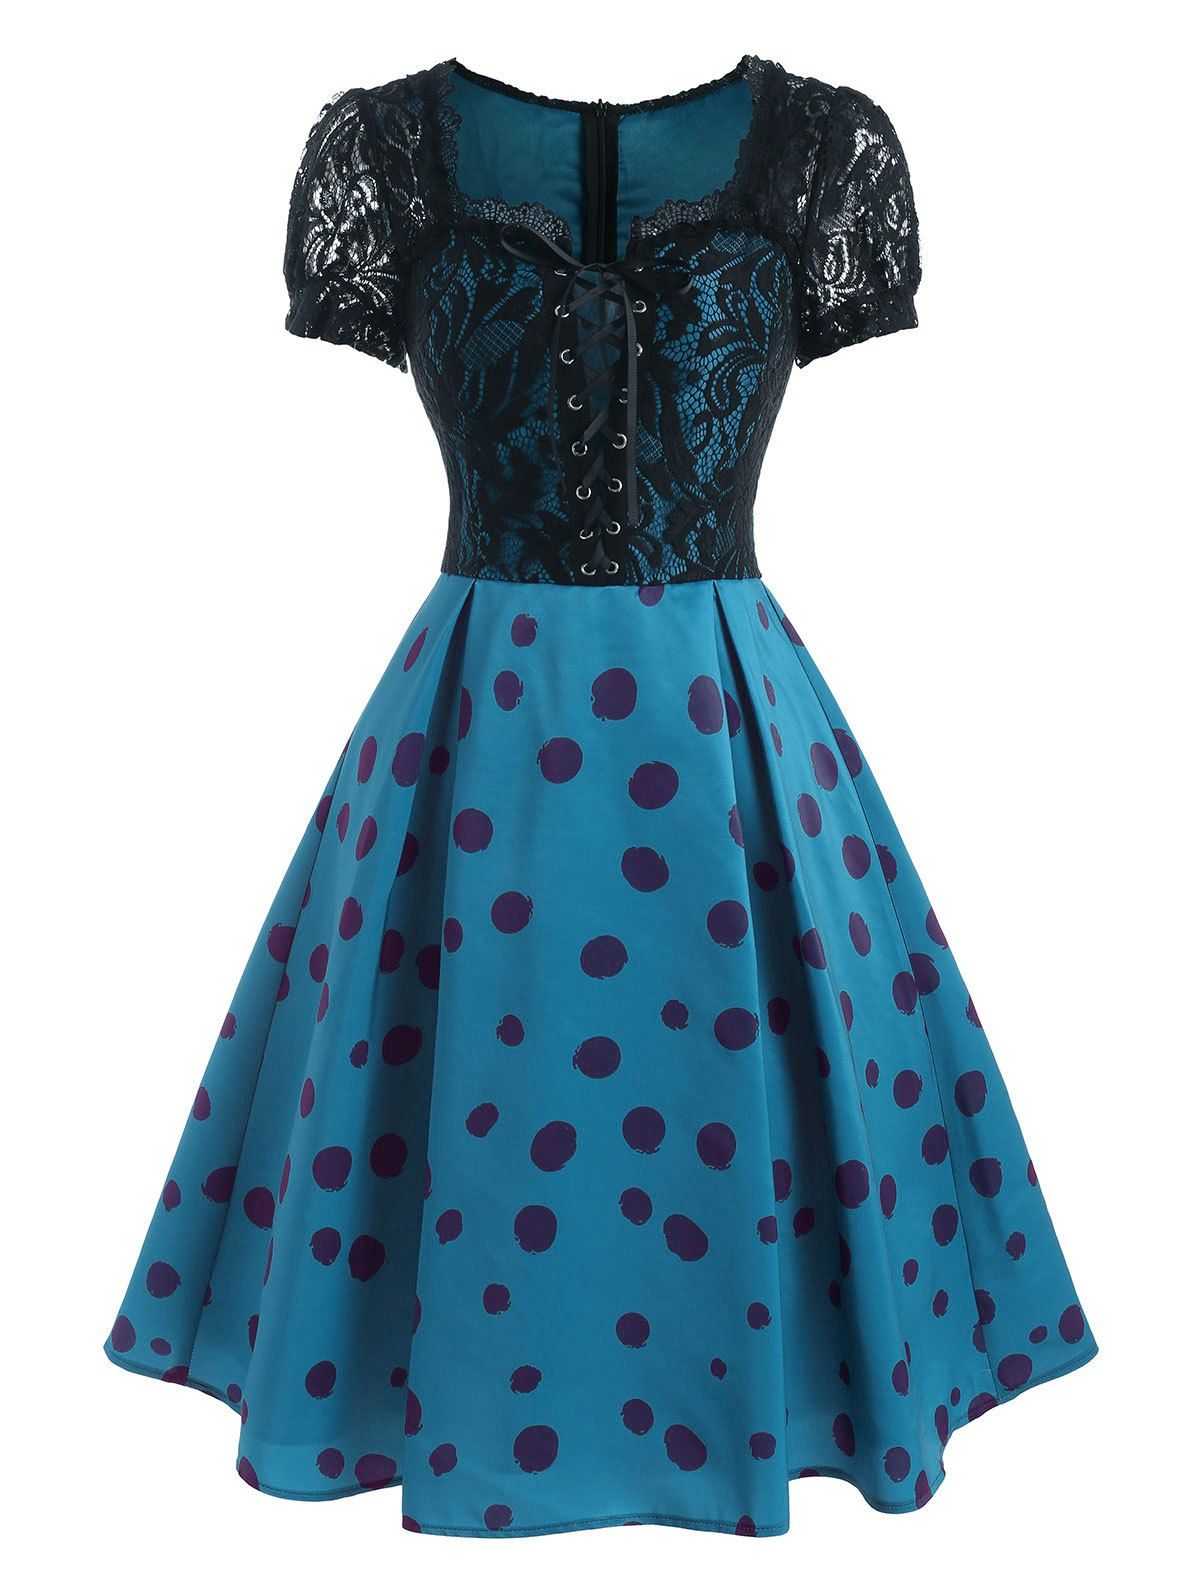 Vintage Lace Sheer Polka Dot Lace Up Corset Style Puff Sleeve Flare Dress - BLUE M